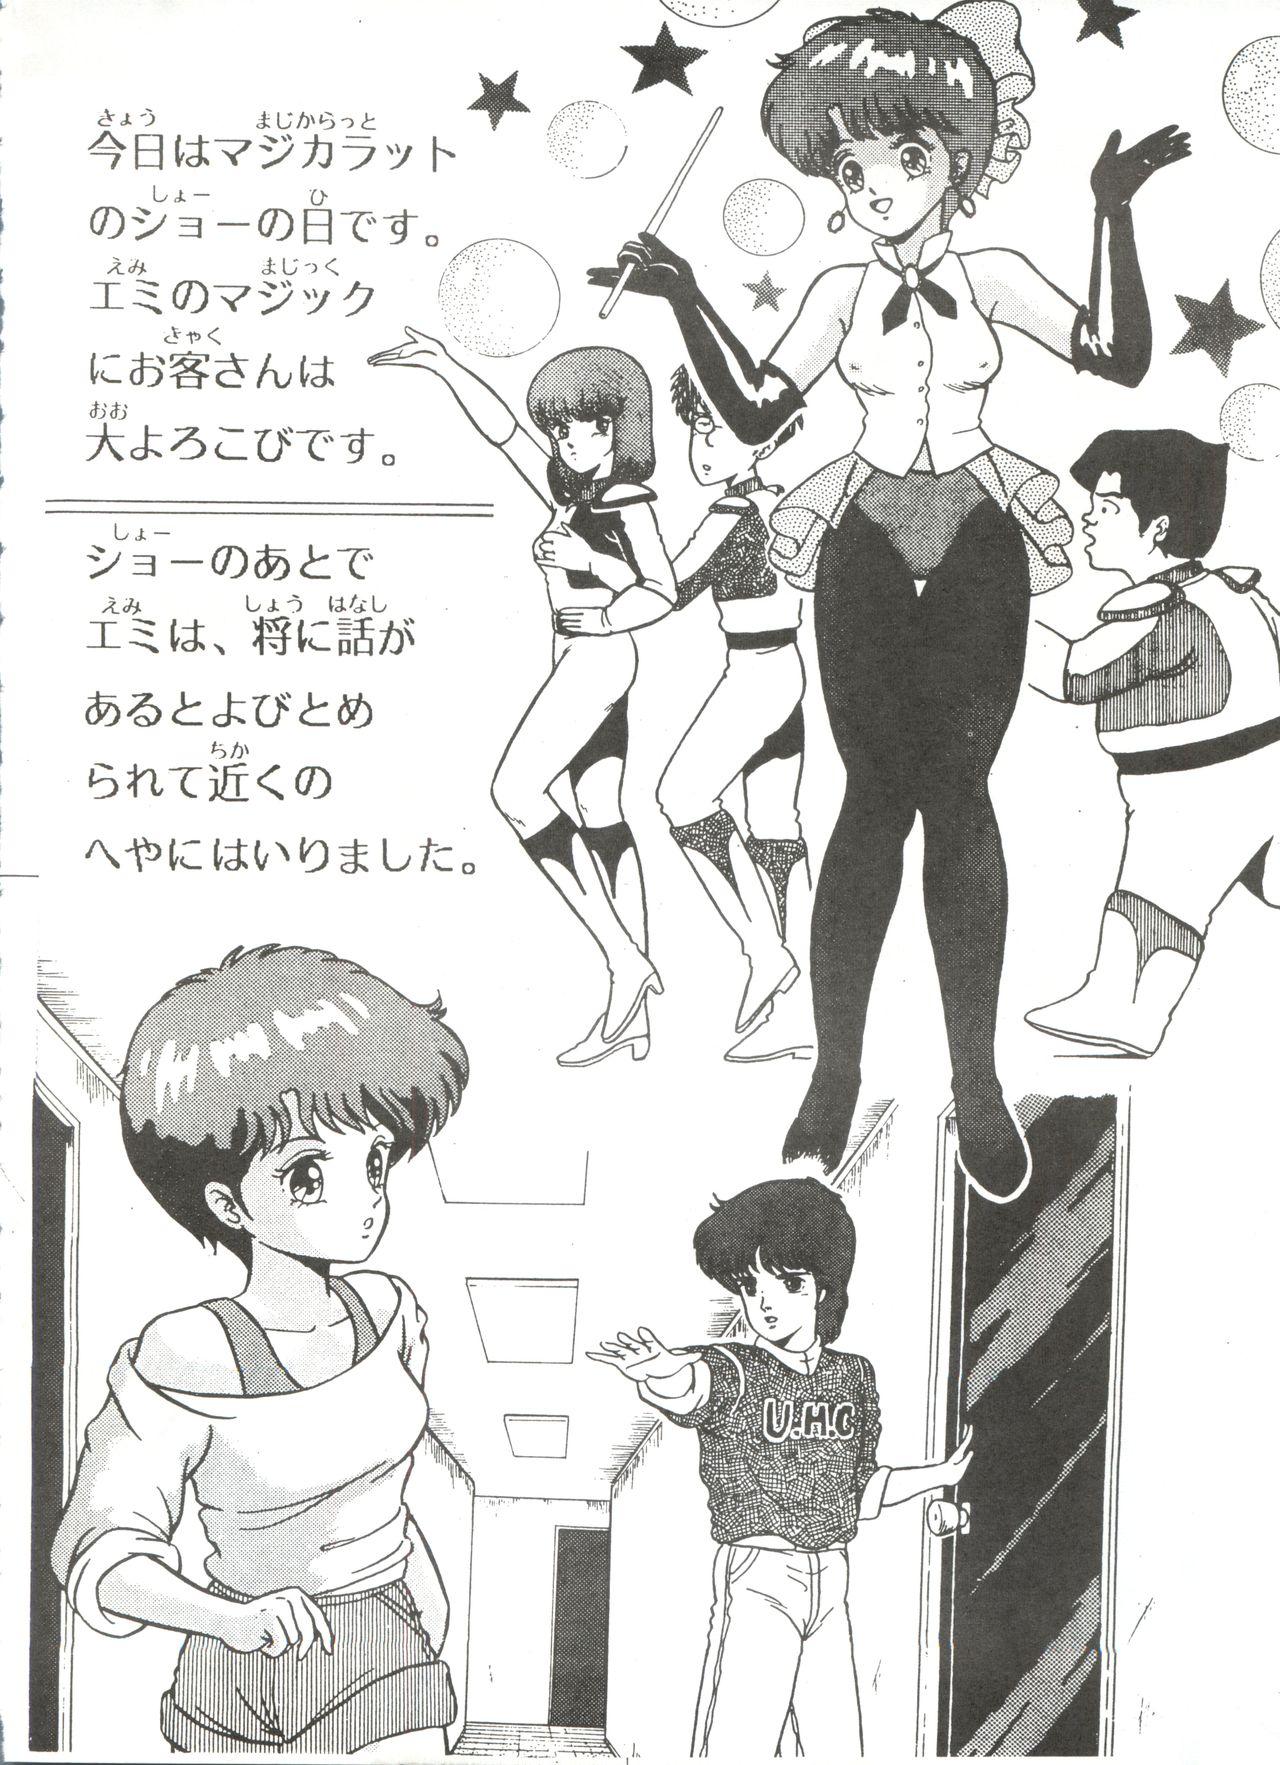 Gang Bang Look Out 3R - Maison ikkoku Magical emi Gundam zz The super dimension fortress macross Group Sex - Page 6